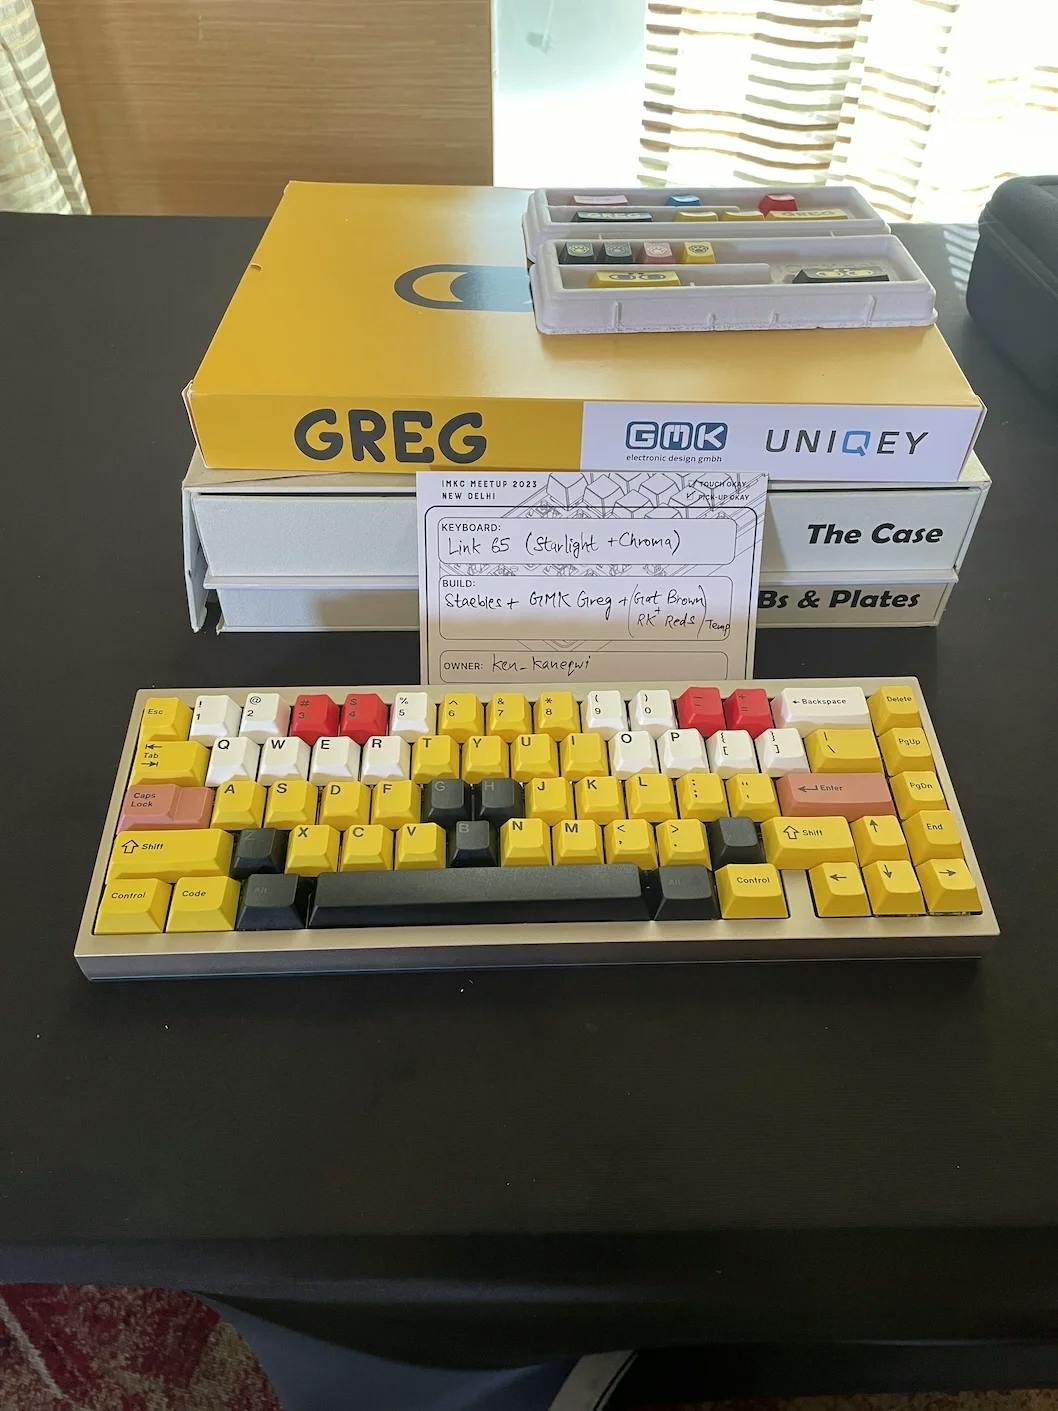 A 65% keyboard with the GMK Greg keycap set